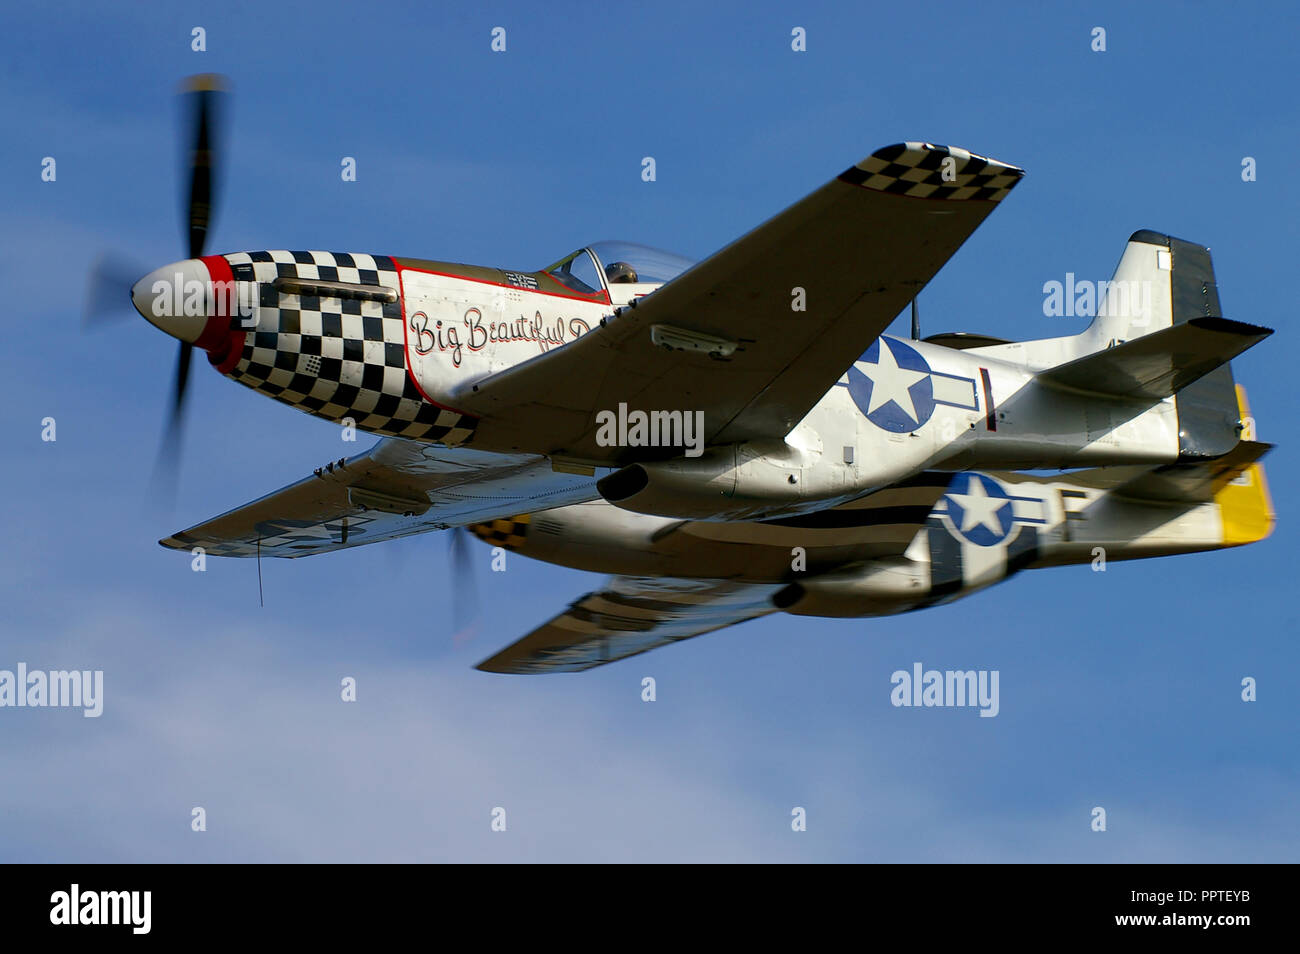 Pair of North American P-51 Mustang Second World War fighter planes flying in blue sky. World War Two US Army Air Force plane duo. Mustangs. P-51s Stock Photo